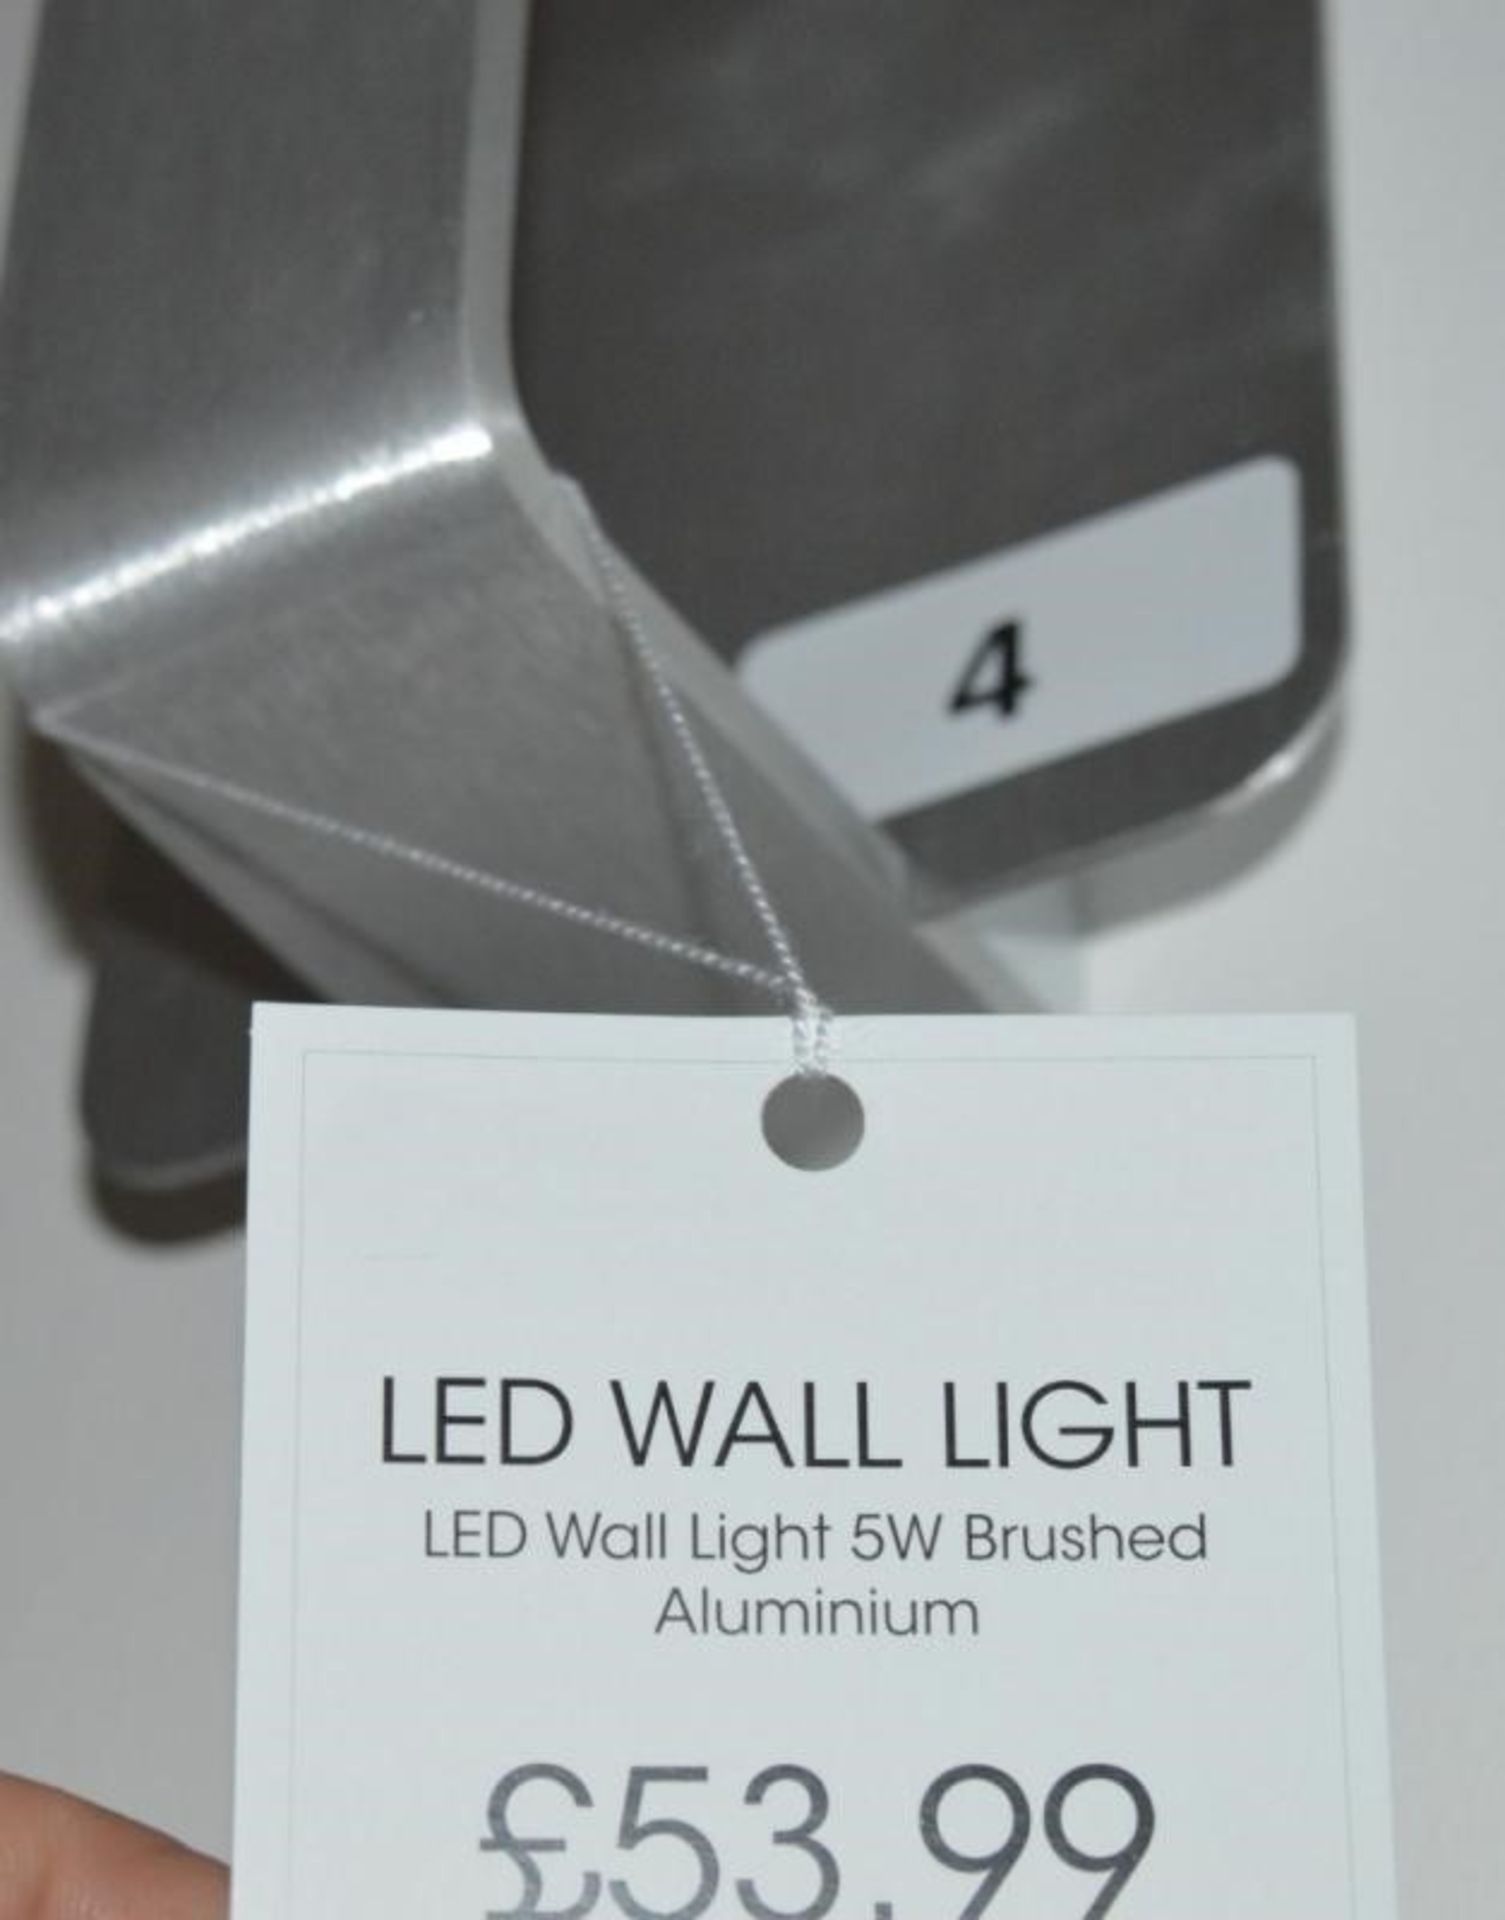 1 x Brushed Aluminium LED 5w Wall Light - Contemporary Design - Ex Display Stock - CL298 - Ref 4 - L - Image 4 of 4